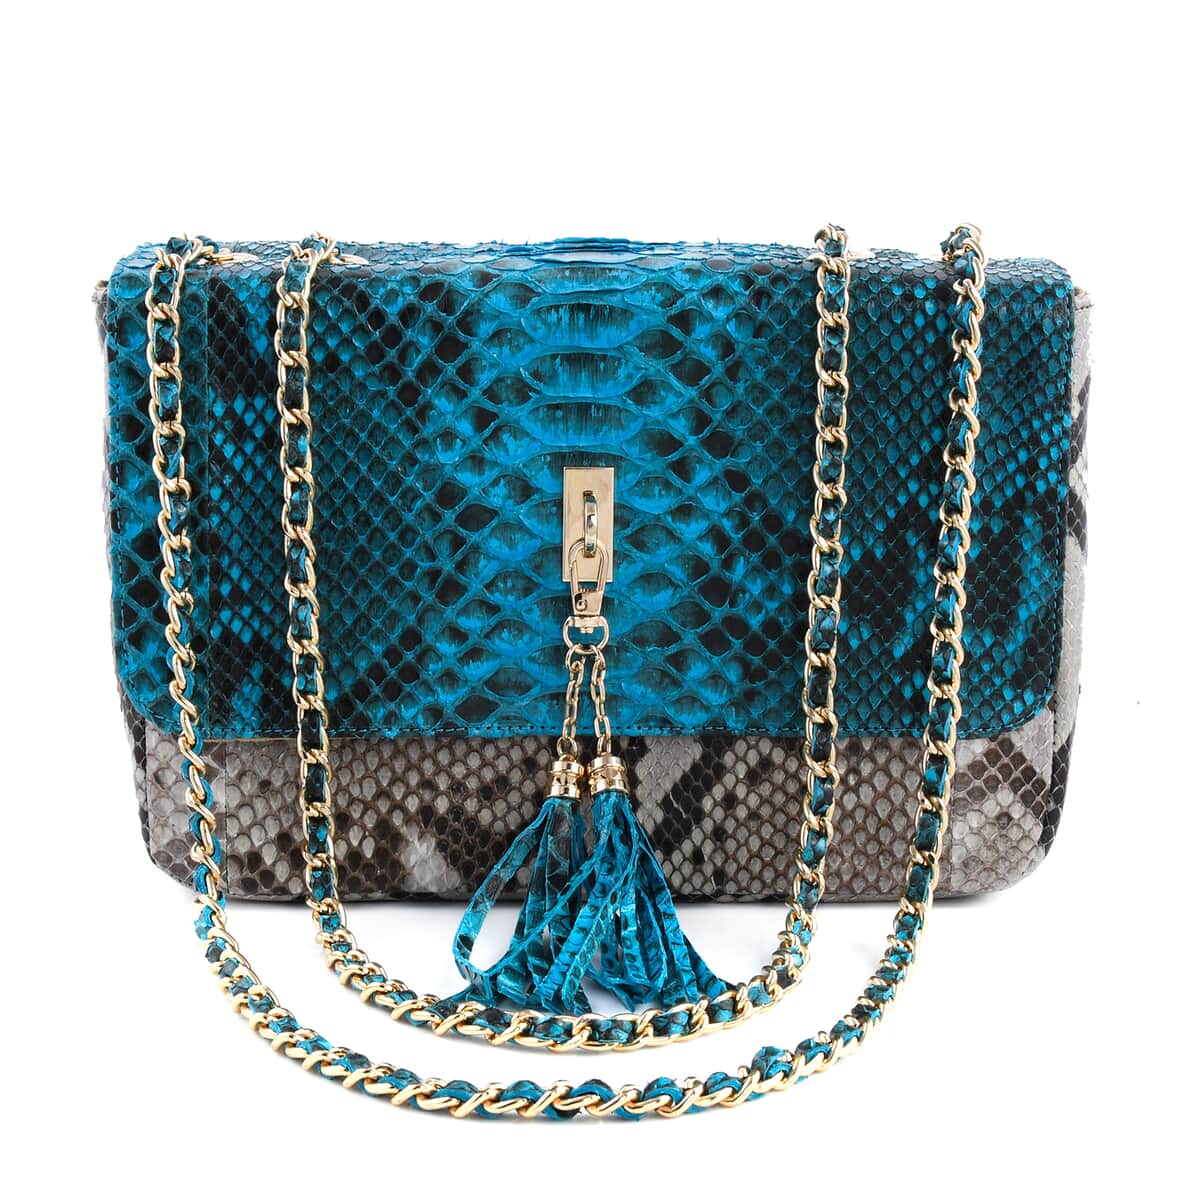 The Grand Pelle Handcrafted Black Color 100 % Genuine Python Leather Crossbody Bag (10.00"x6.75"x3.5") image number 1